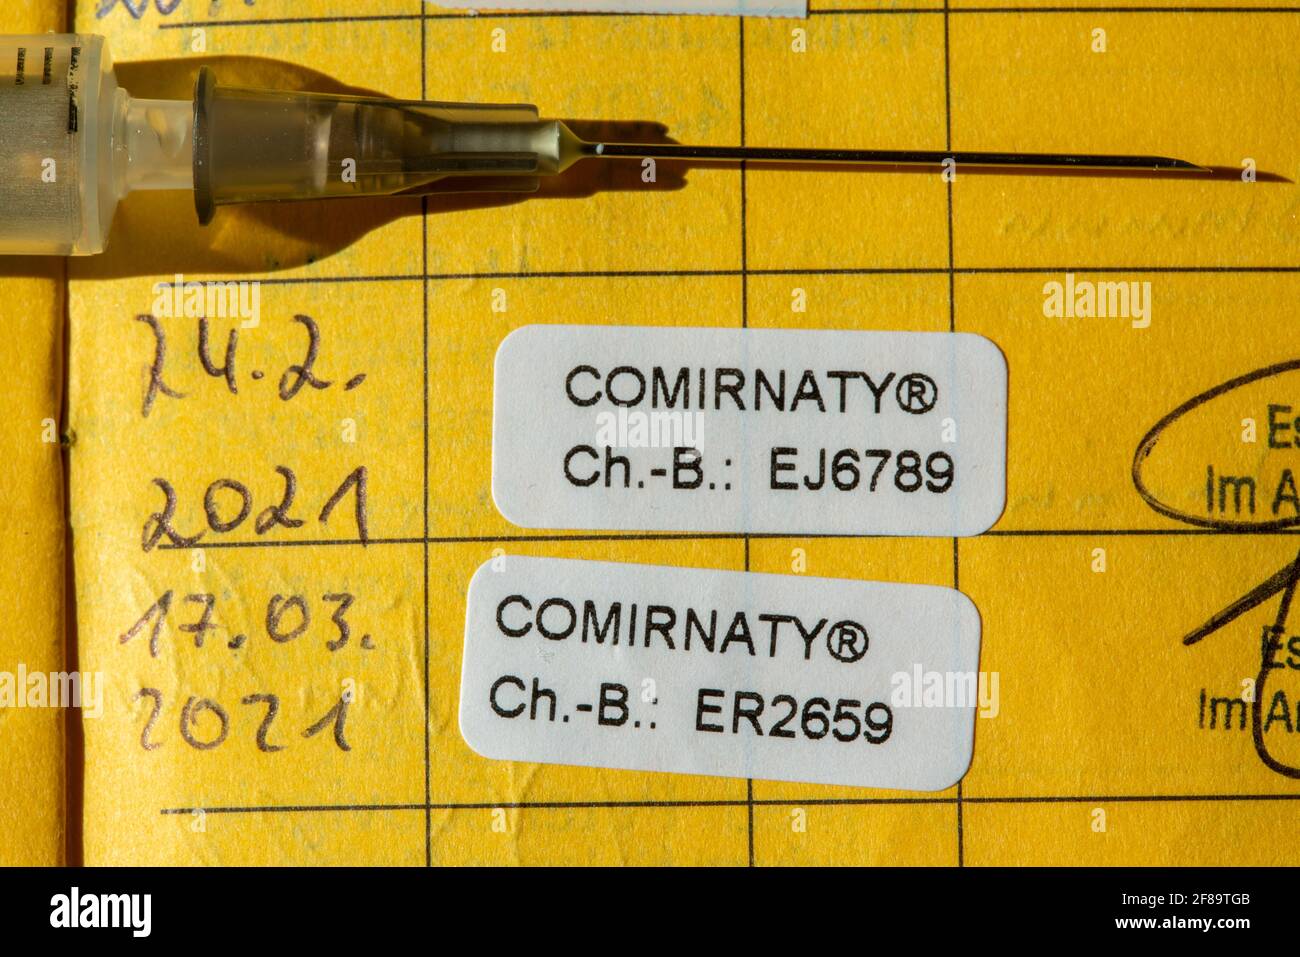 Vaccination book, proof of double vaccination with the Corona vaccine from BioNTEch/Pfizer, COMIRNATY/BNT162B2, against the Covid-19 virus, vaccinated Stock Photo